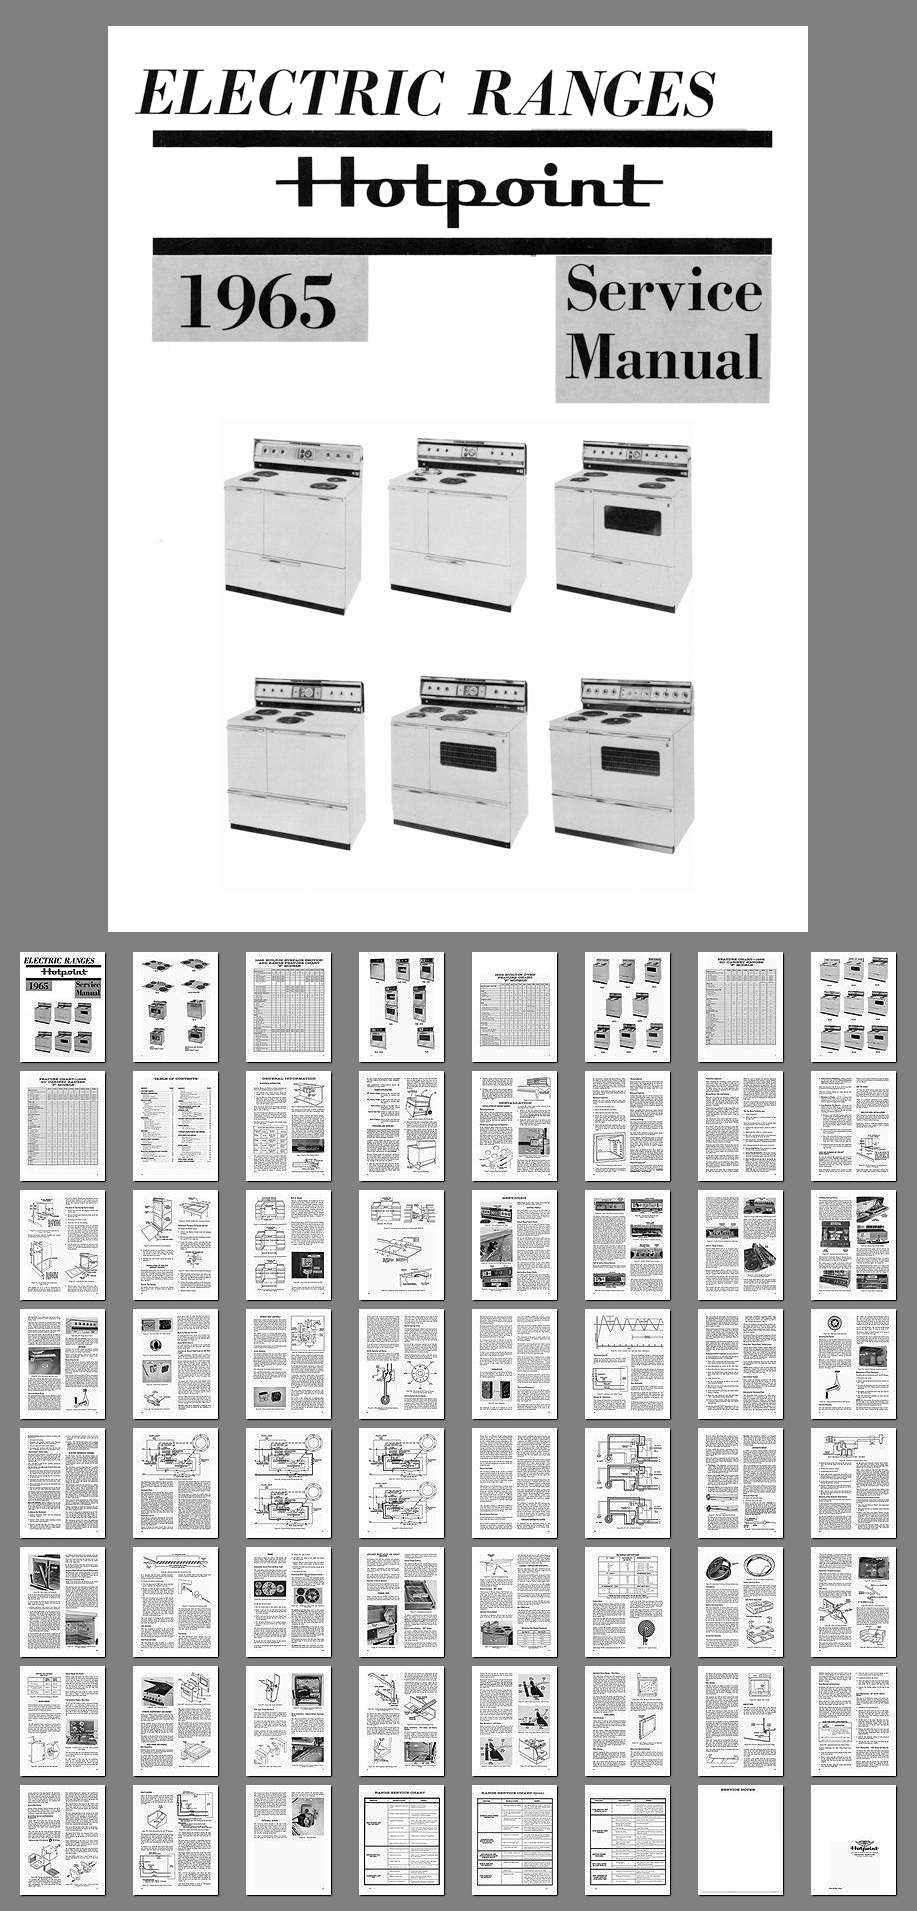 hotpoint stove manual for oven